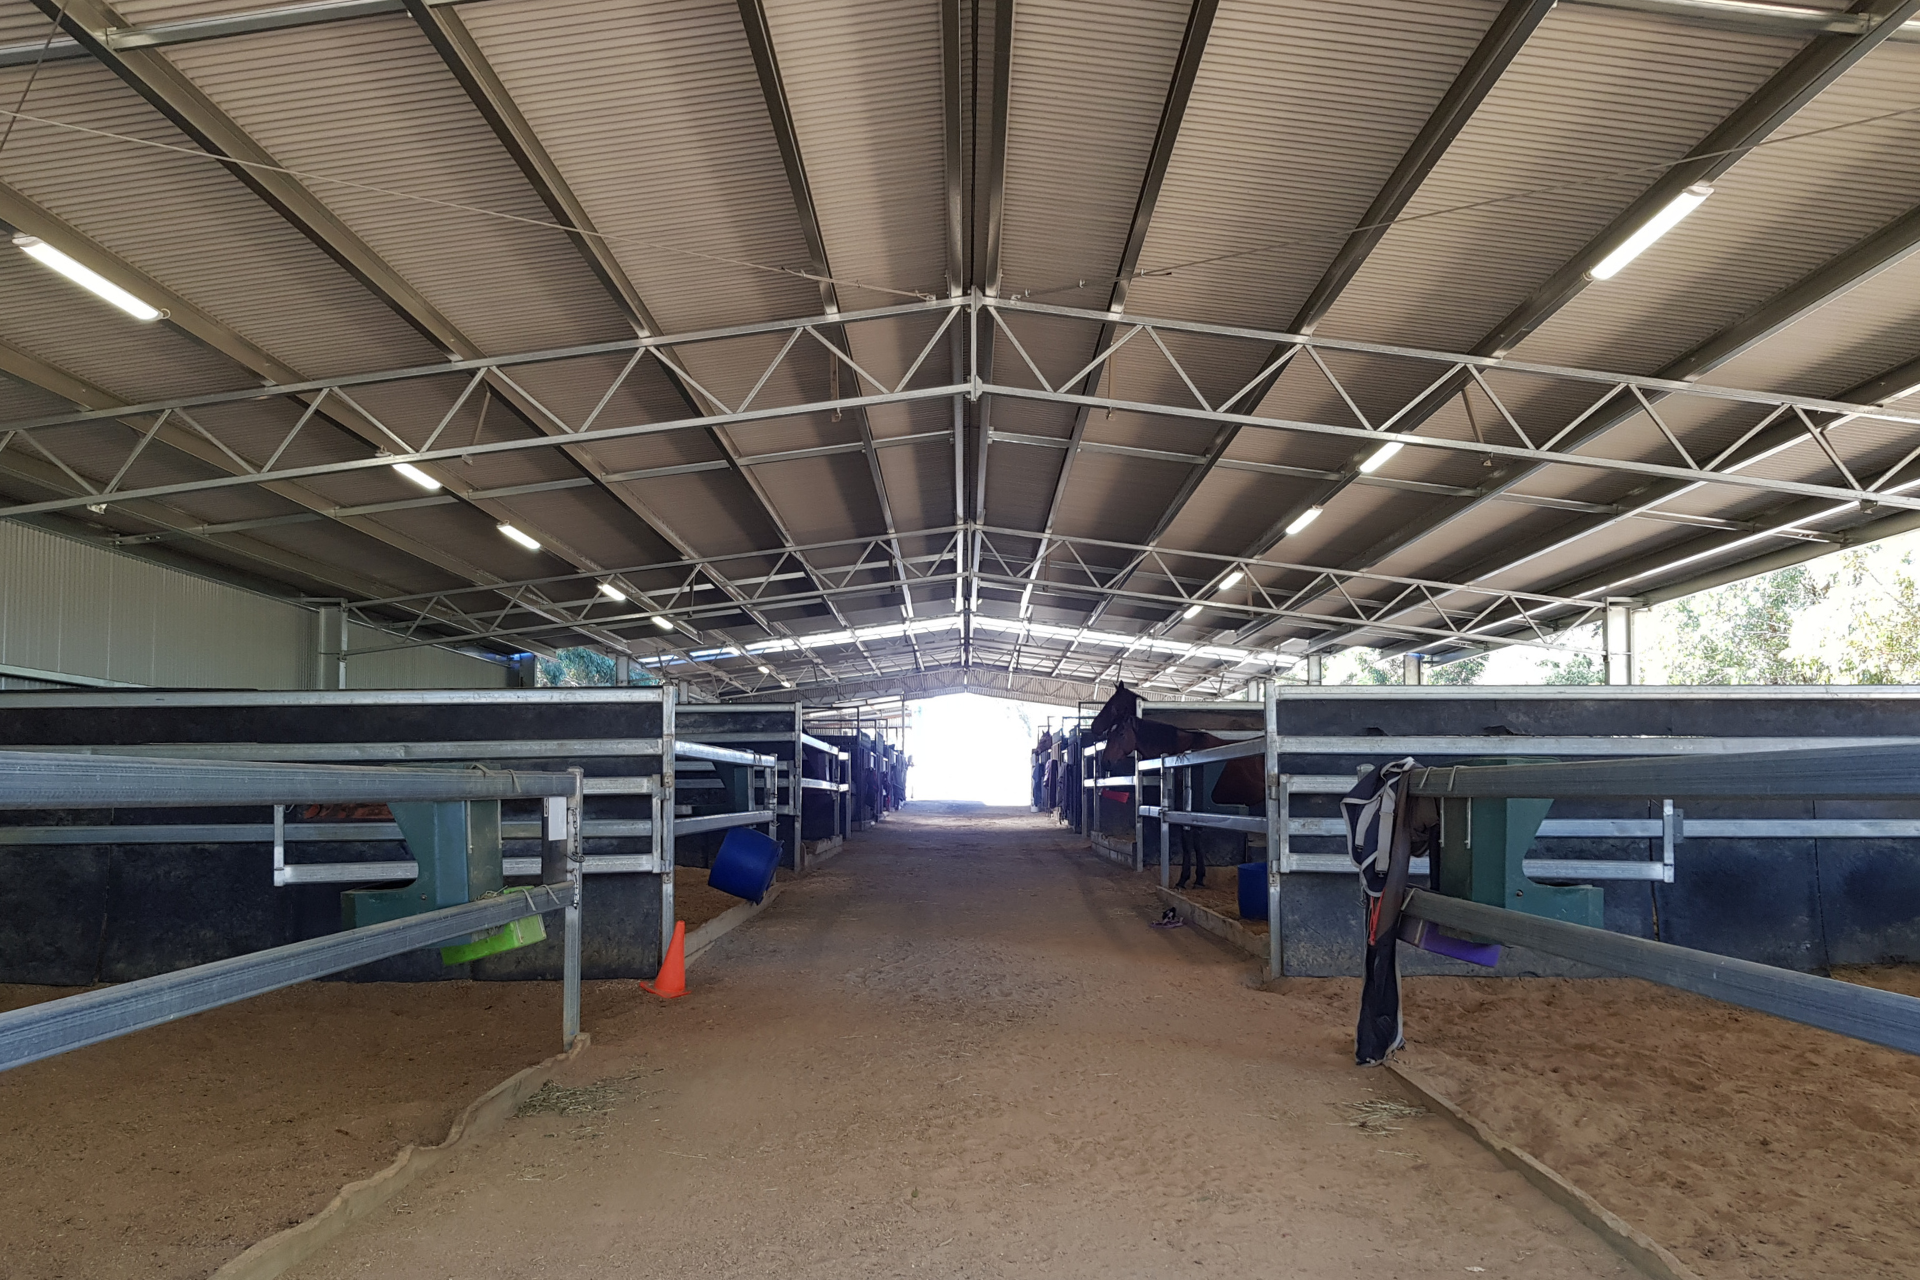 A 45m x 15m x 3.6m horse yard cover at Miners Rest VIC